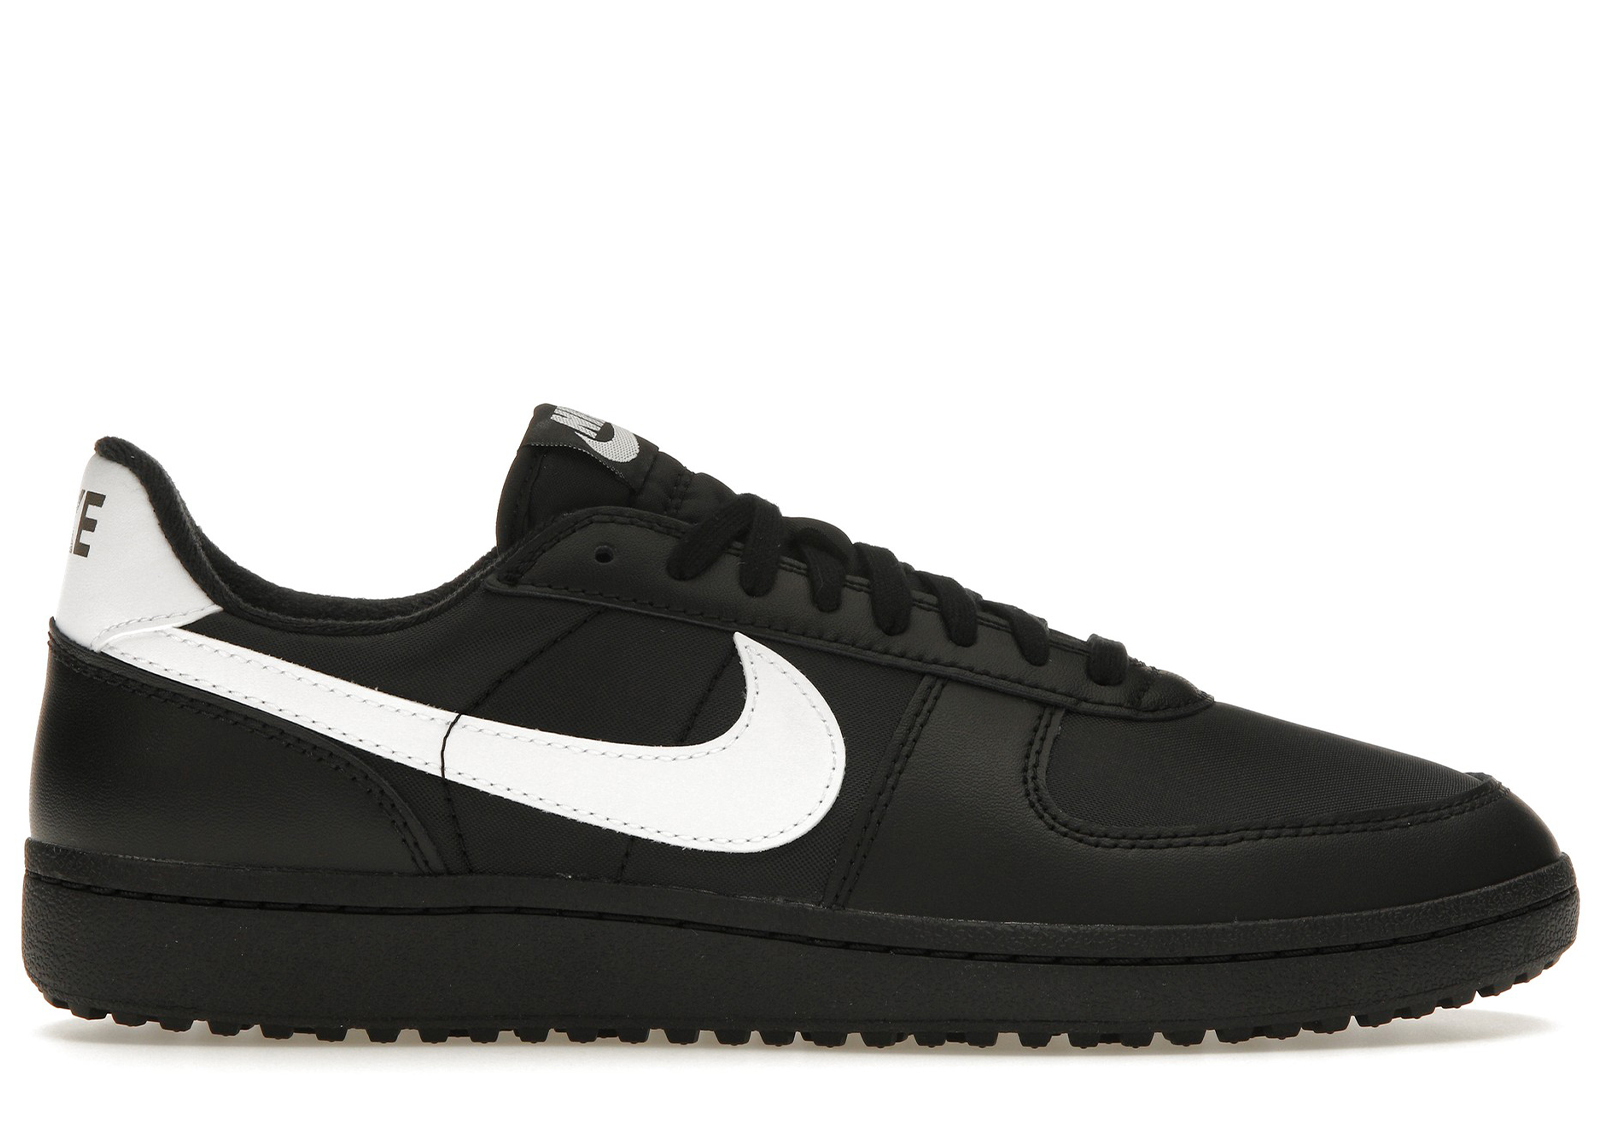 Nike Field General 82 SP Black White Product